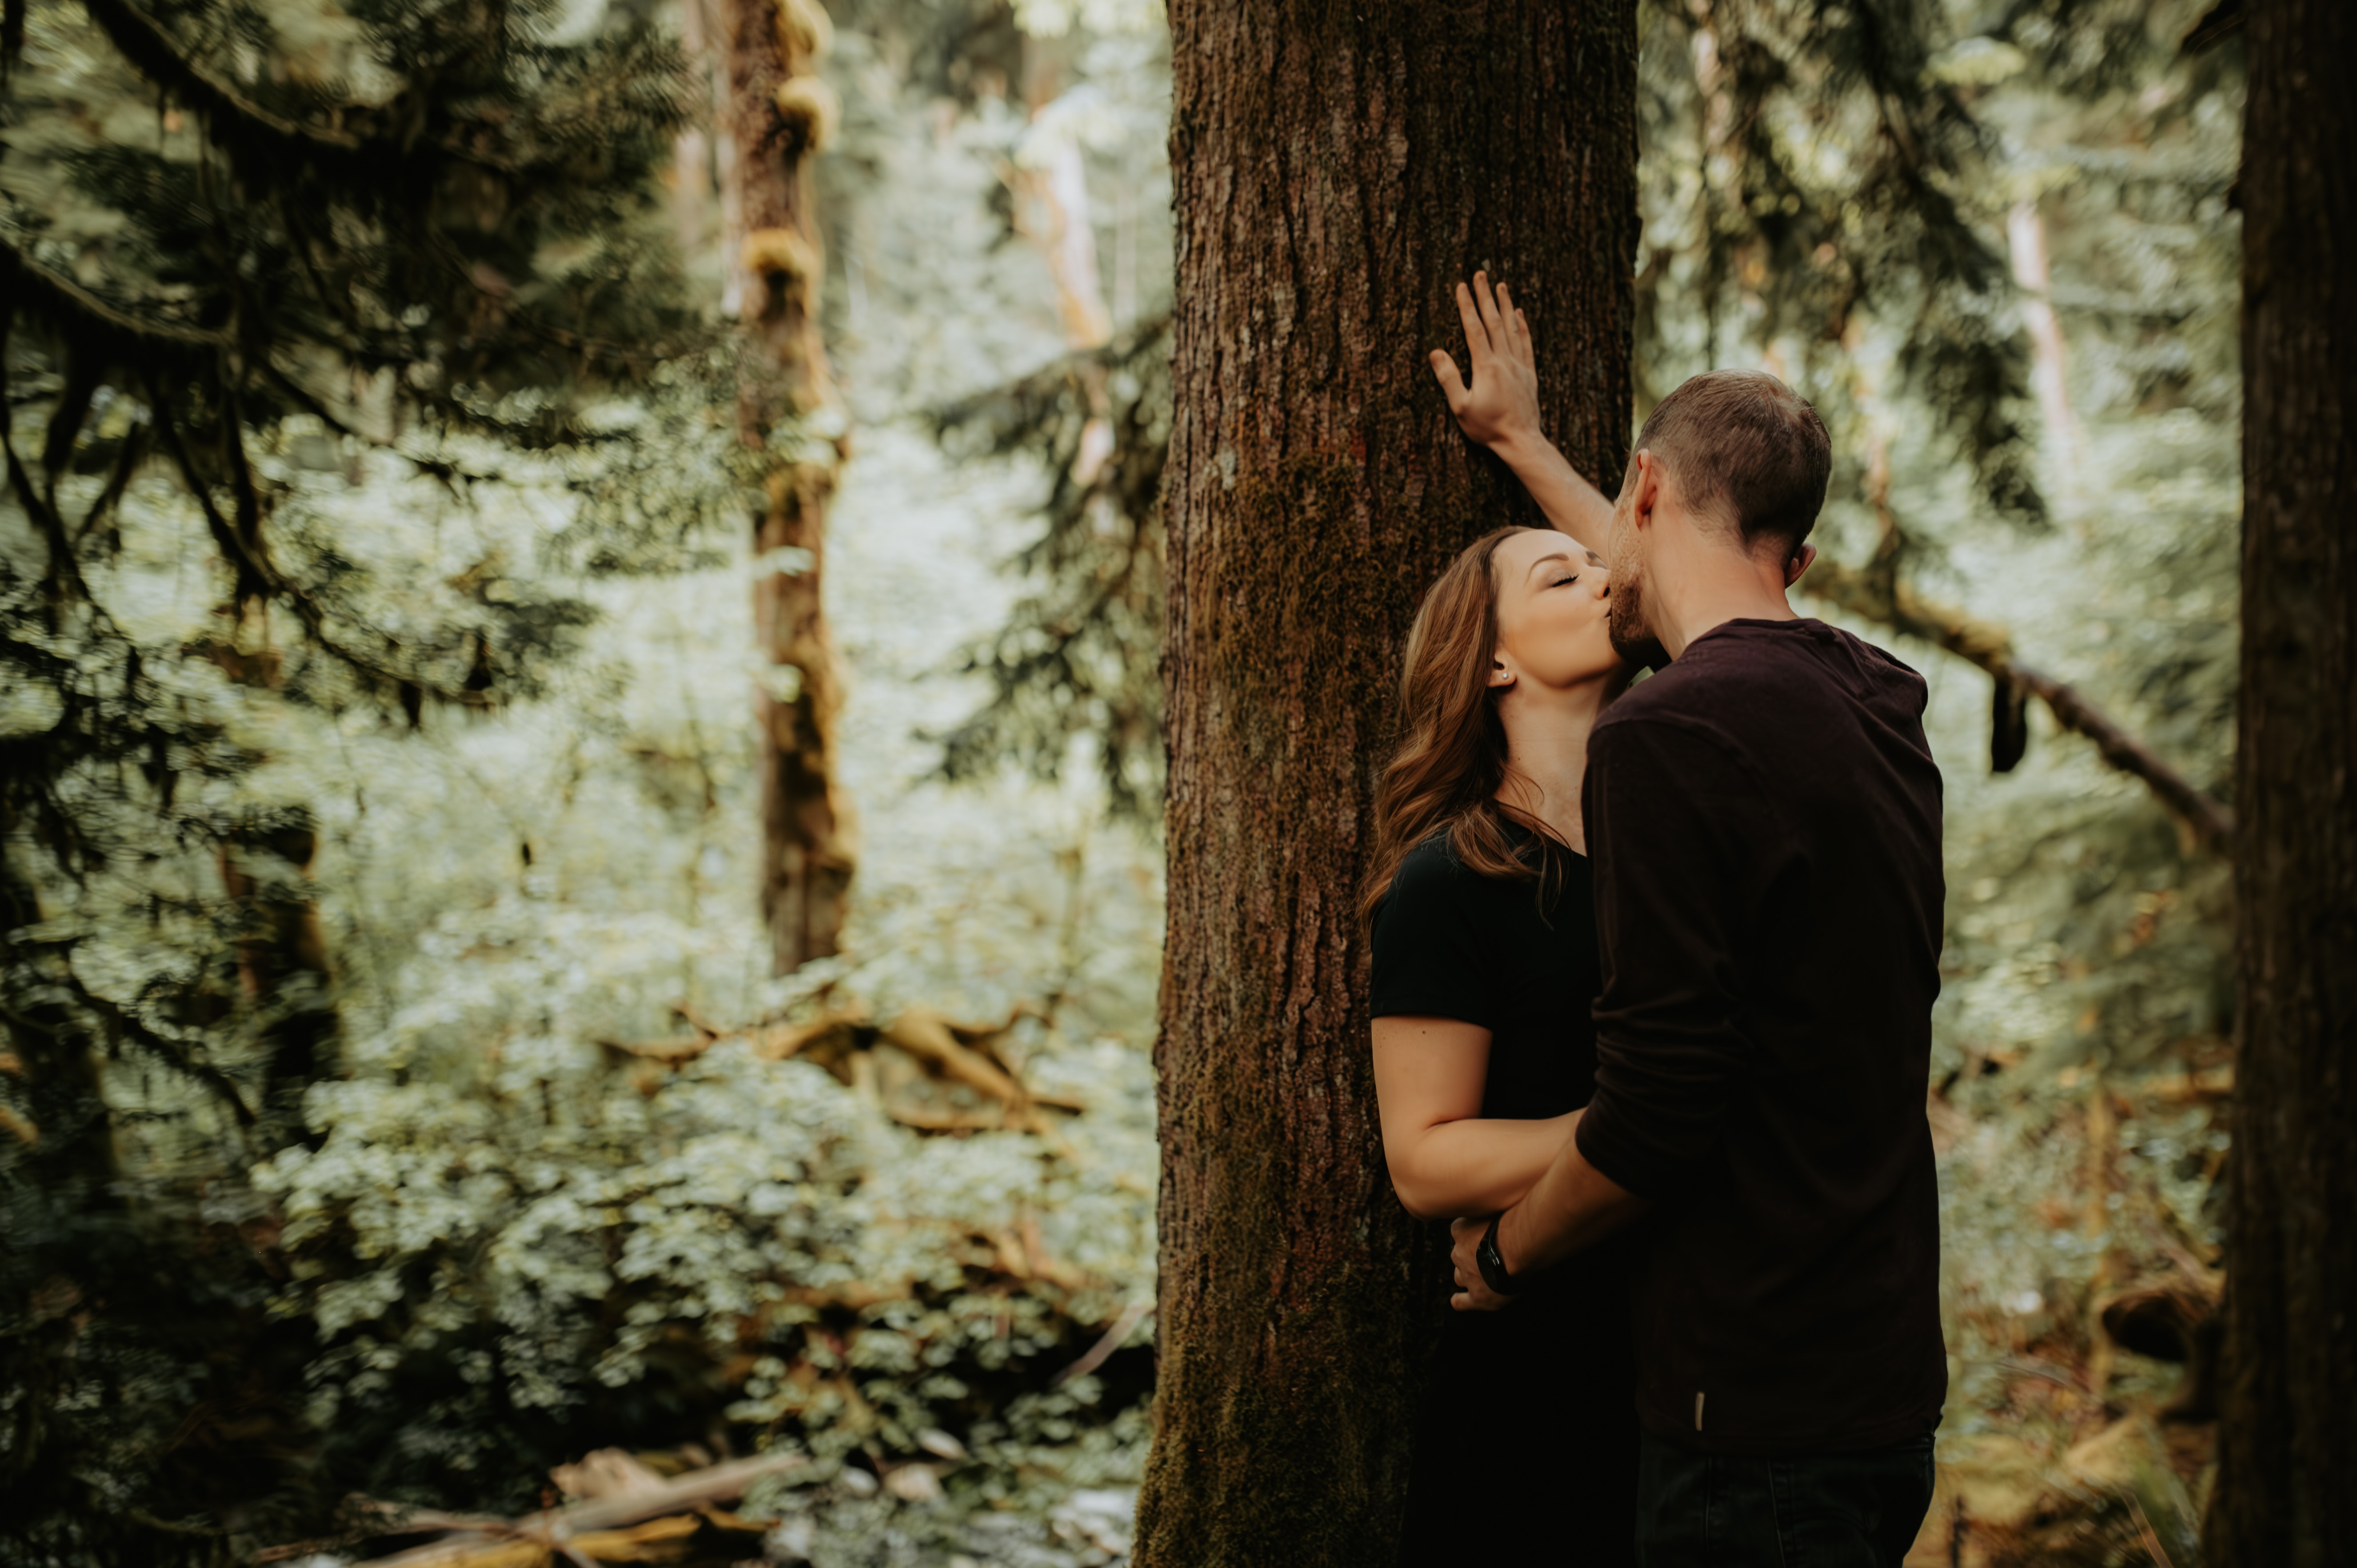 A couple kissing in a forest. | Source: Pexels